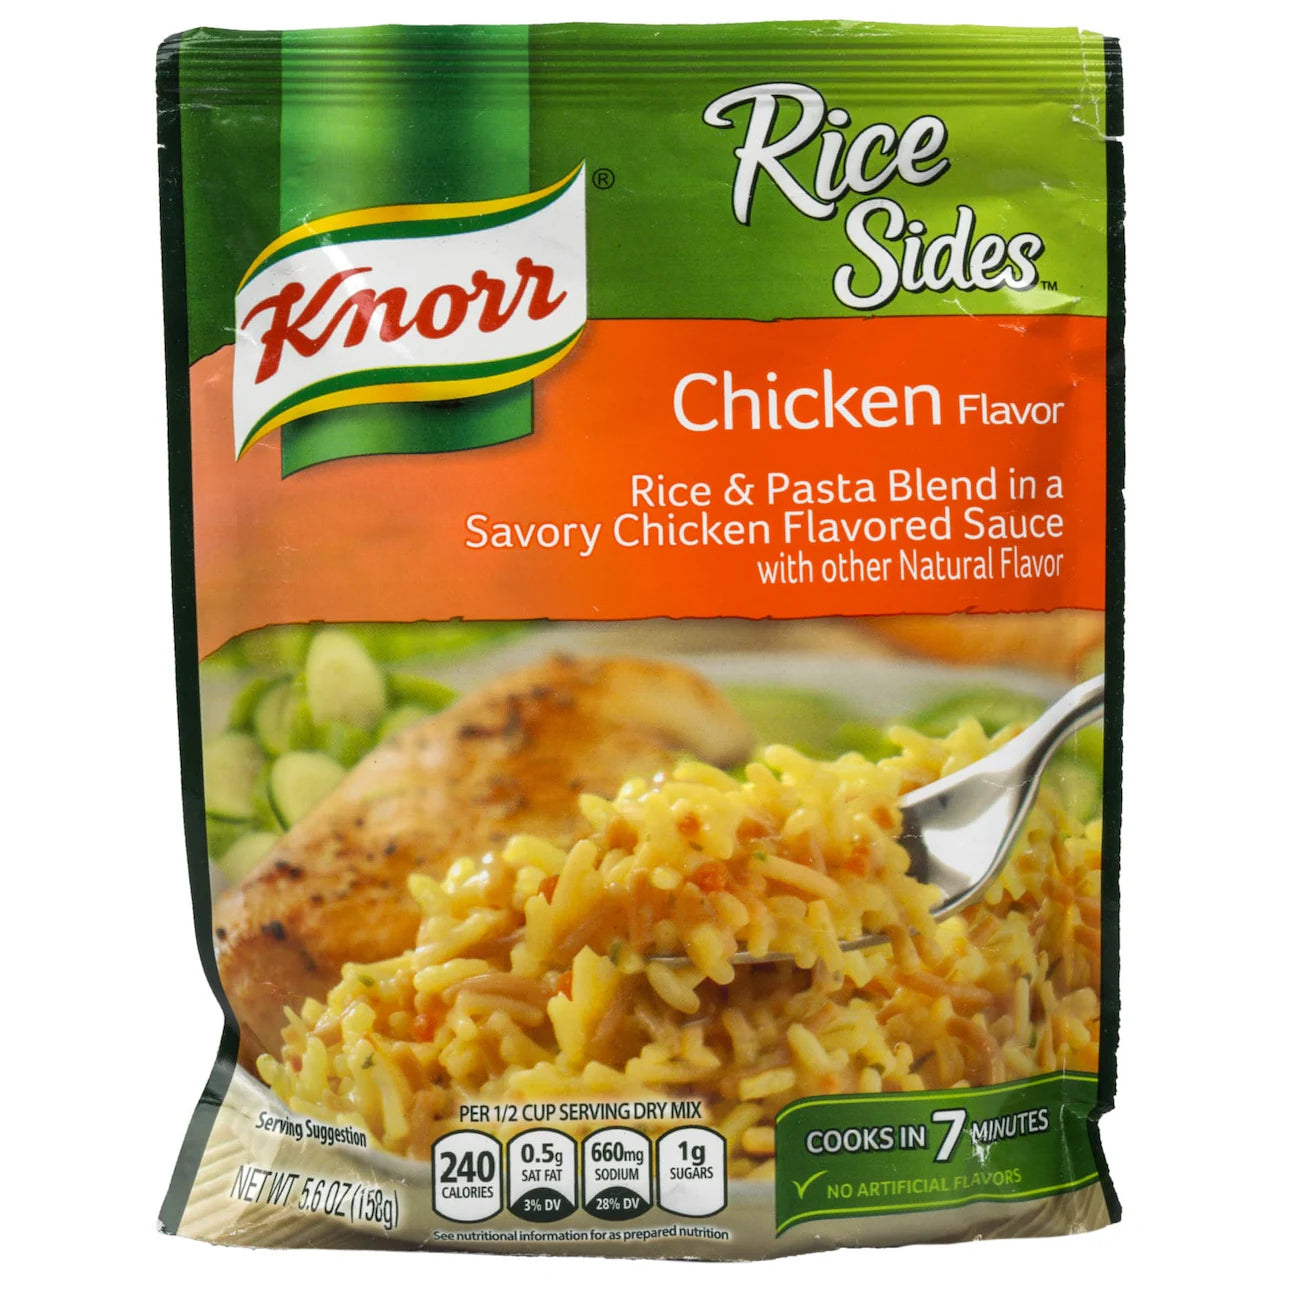 Knorr Chicken Flavored Rice Sides, 5.6 oz. Packs